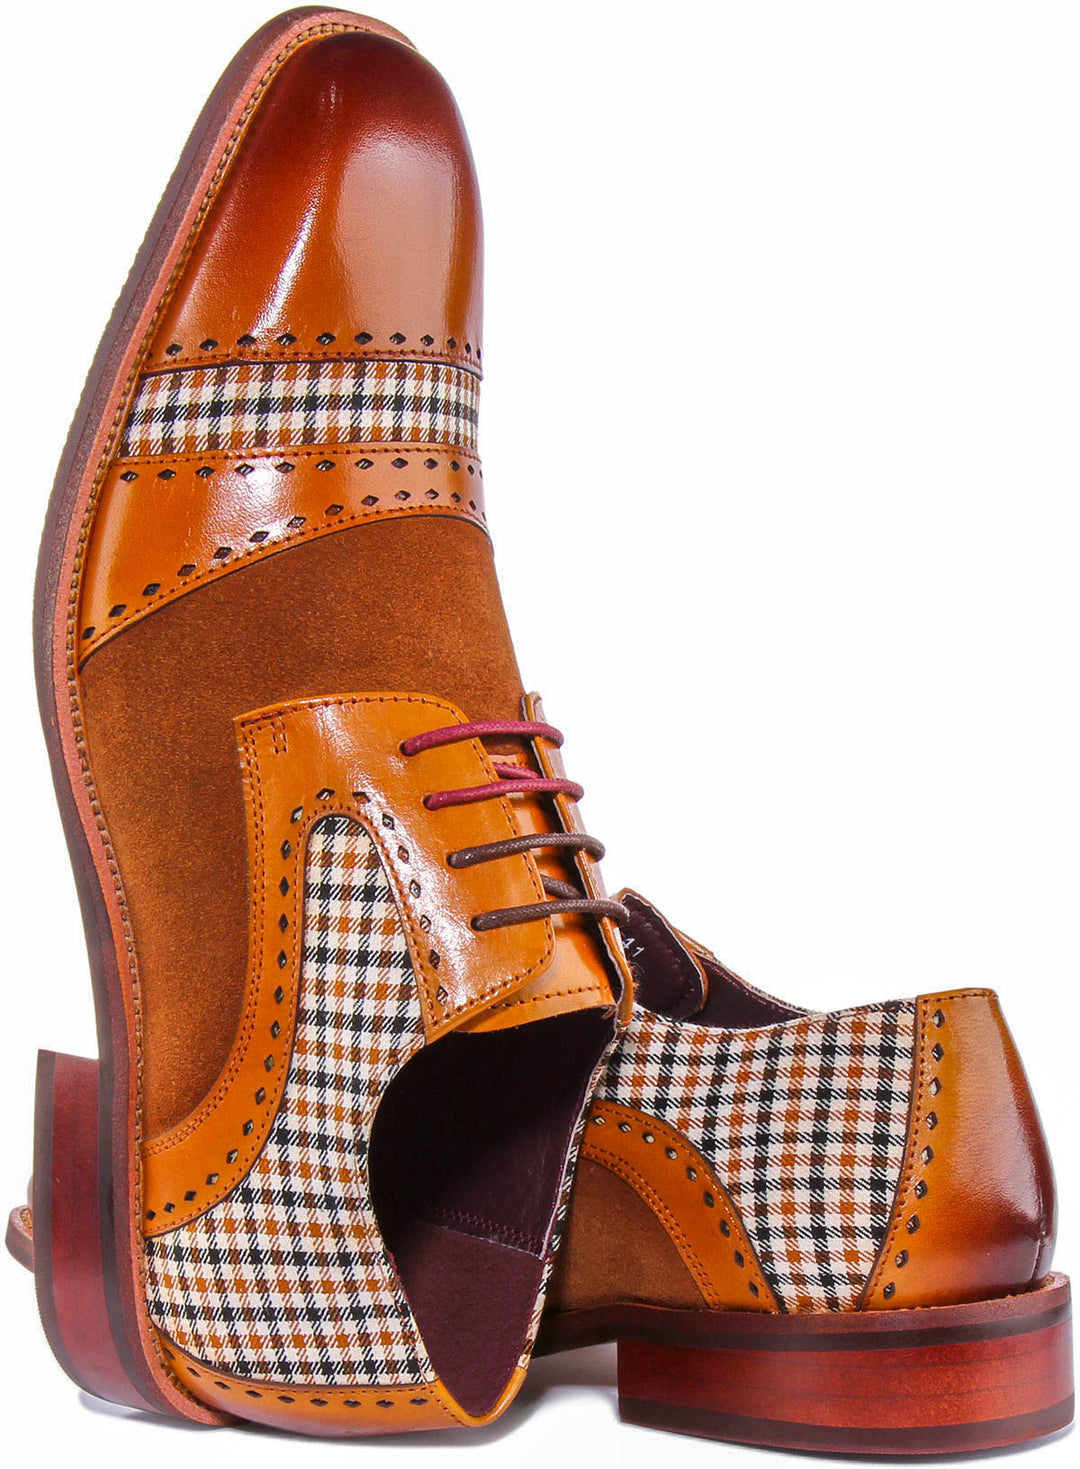 Kyle Lace up Check Oxford In Brown